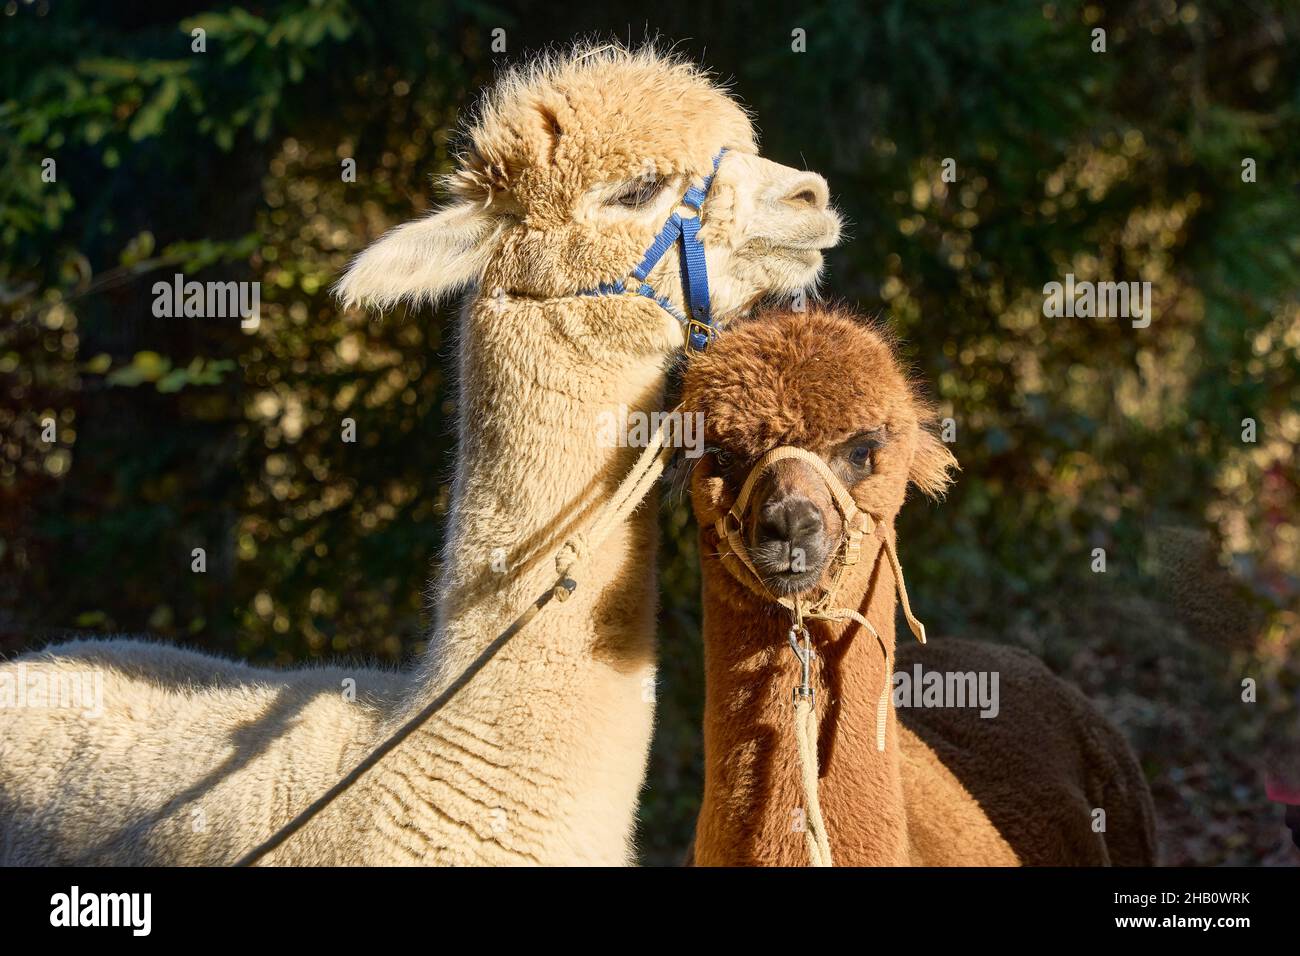 2 Two Alpacas, Beige And Brown, Adult And Youngster, Stand Together And Look In Different Directions. Background Blurred Deciduous Hedge. Bauma Zurich Stock Photo